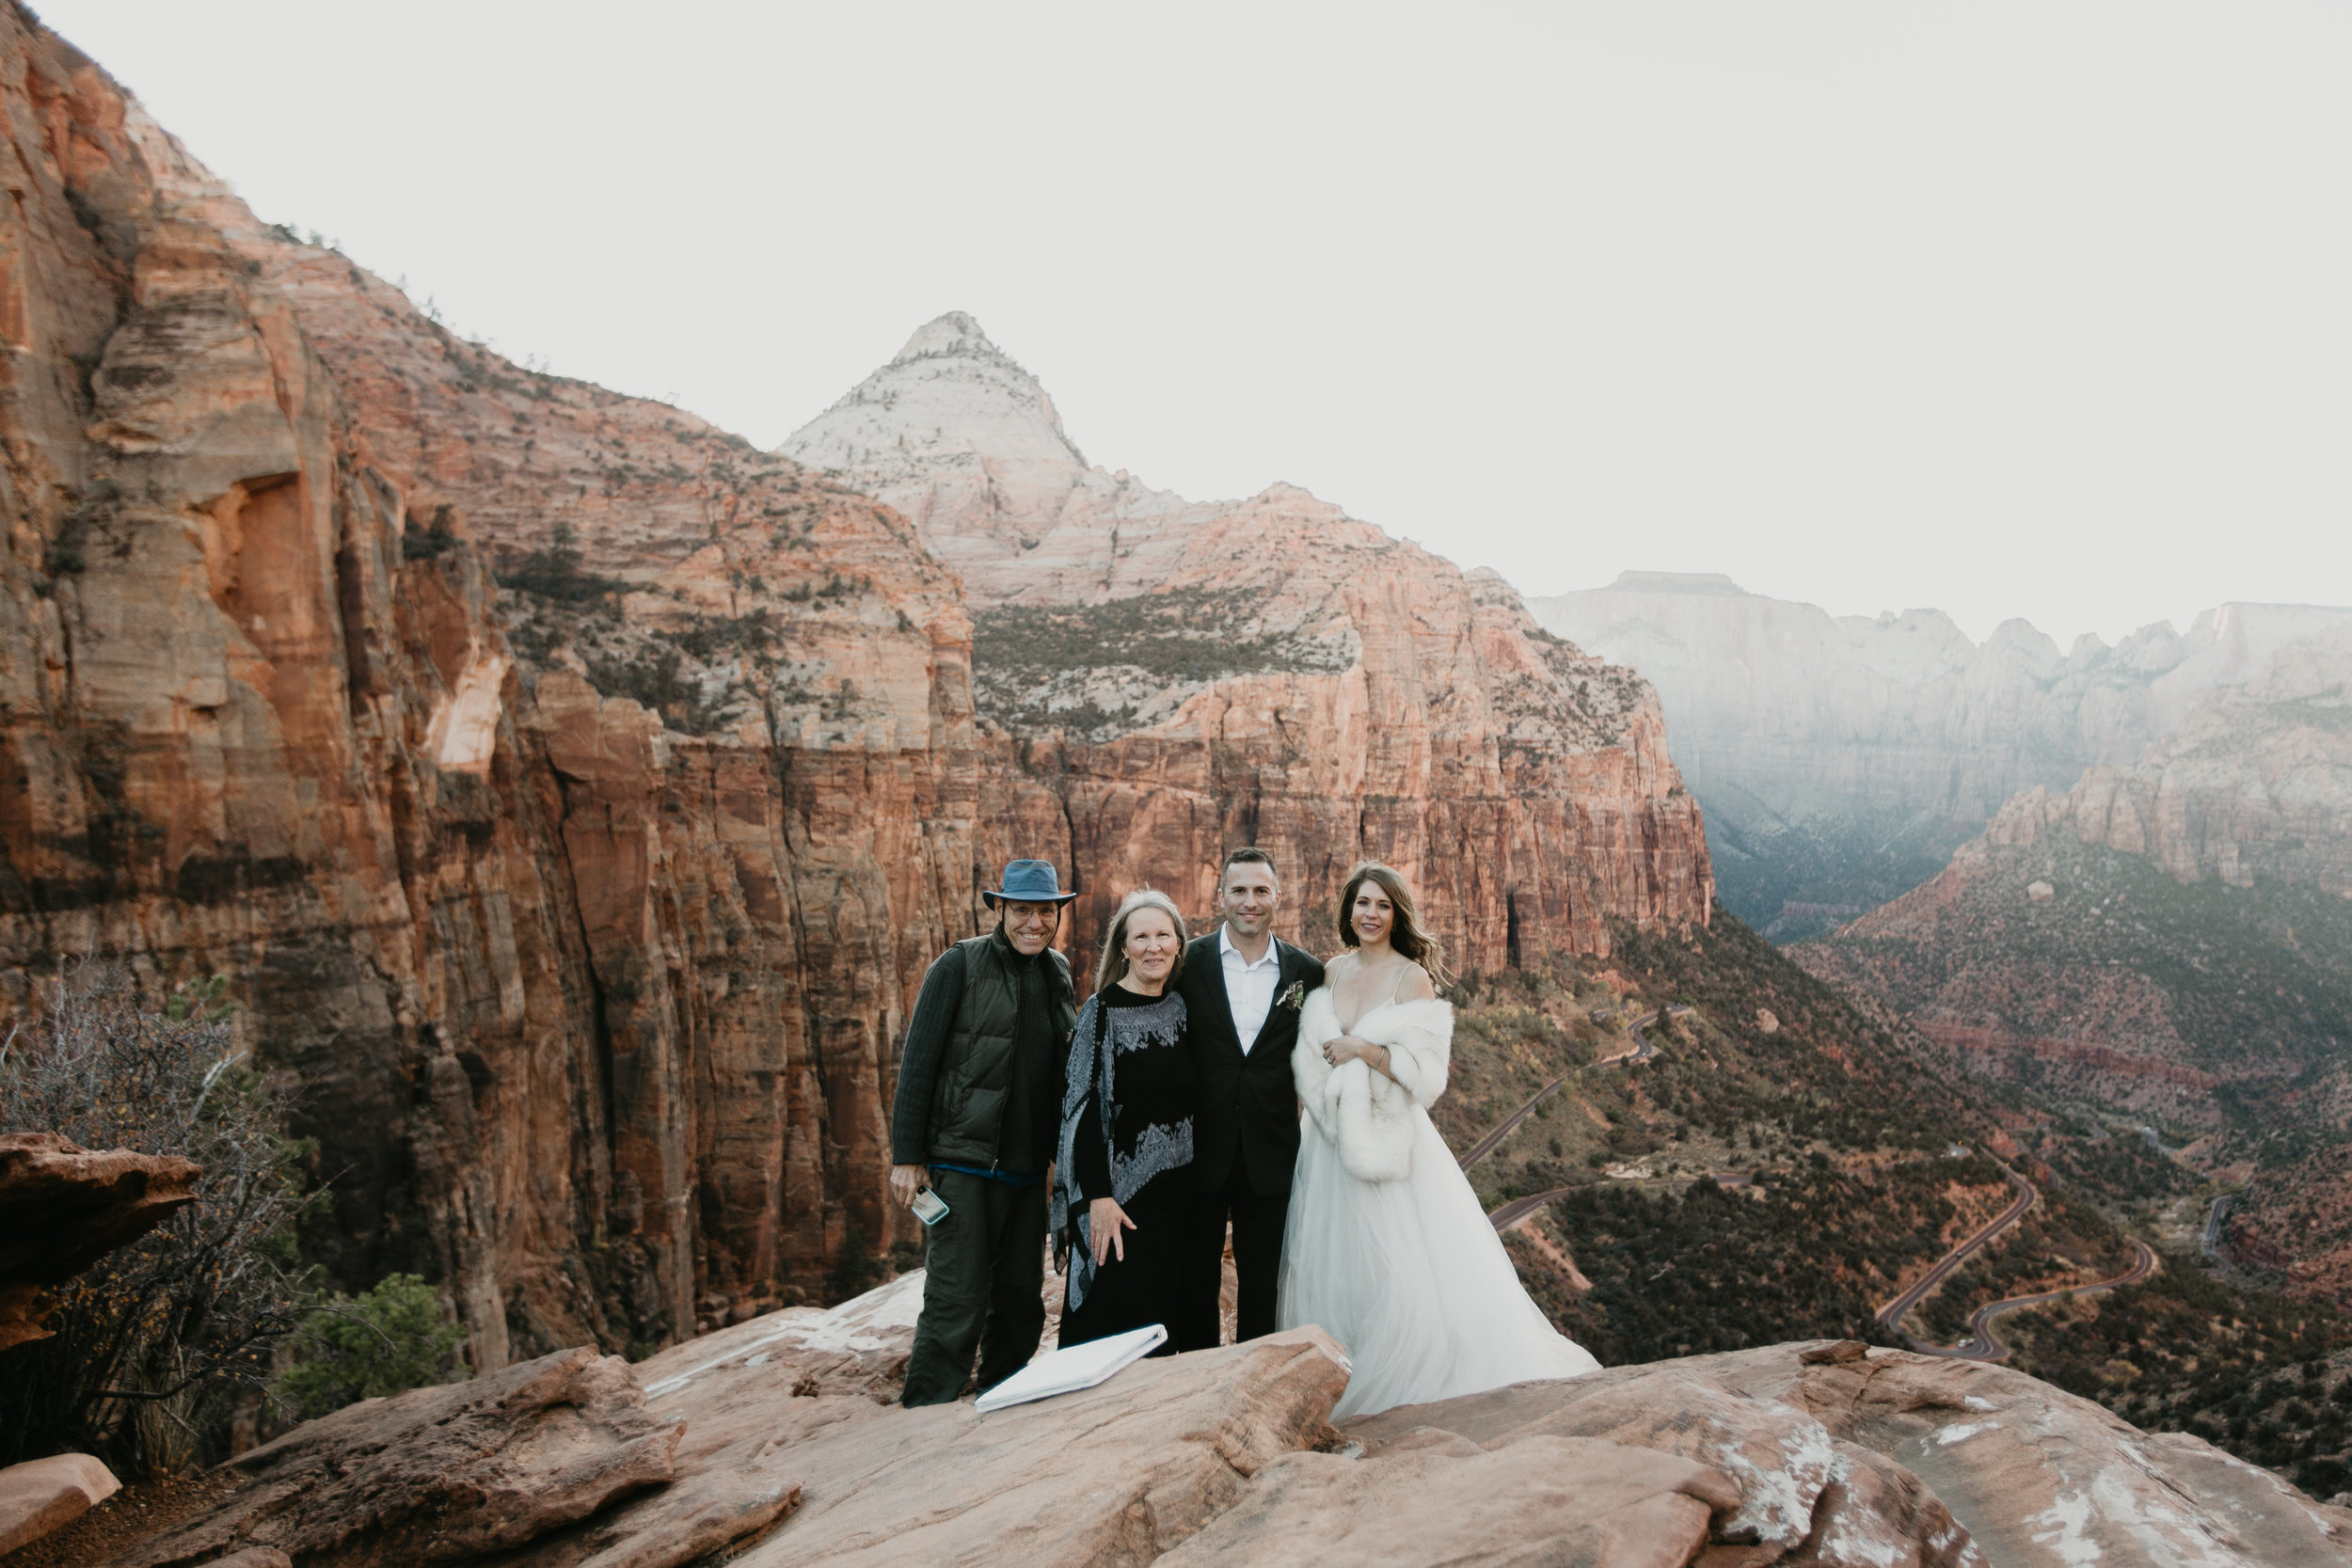 nicole-daacke-photography-zion-national-park-elopement-photographer-canyon-overlook-trail-elope-hiking-adventure-wedding-photos-fall-utah-red-rock-canyon-stgeorge-eloping-photographer-62.jpg